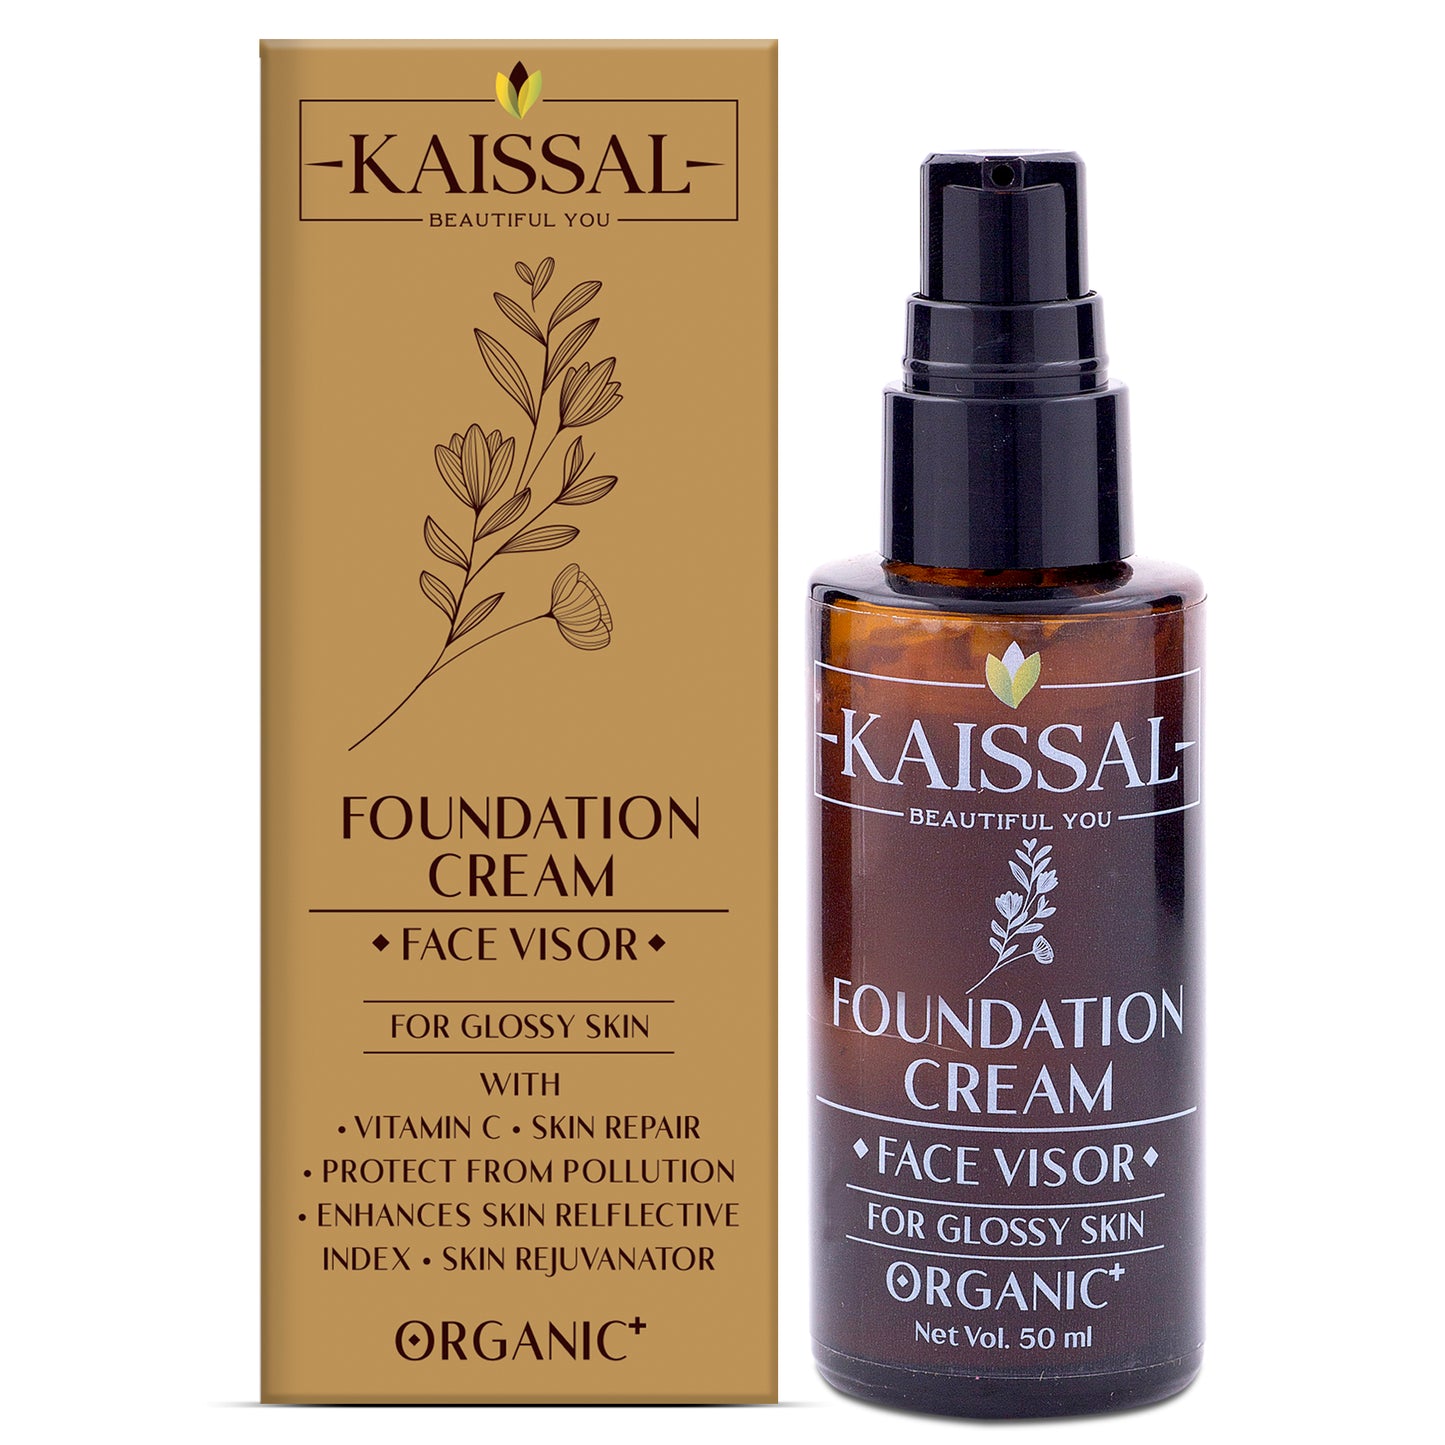 Kaissal Weightless Foundation Cream for Nourished and Glowing Skin - 50gm